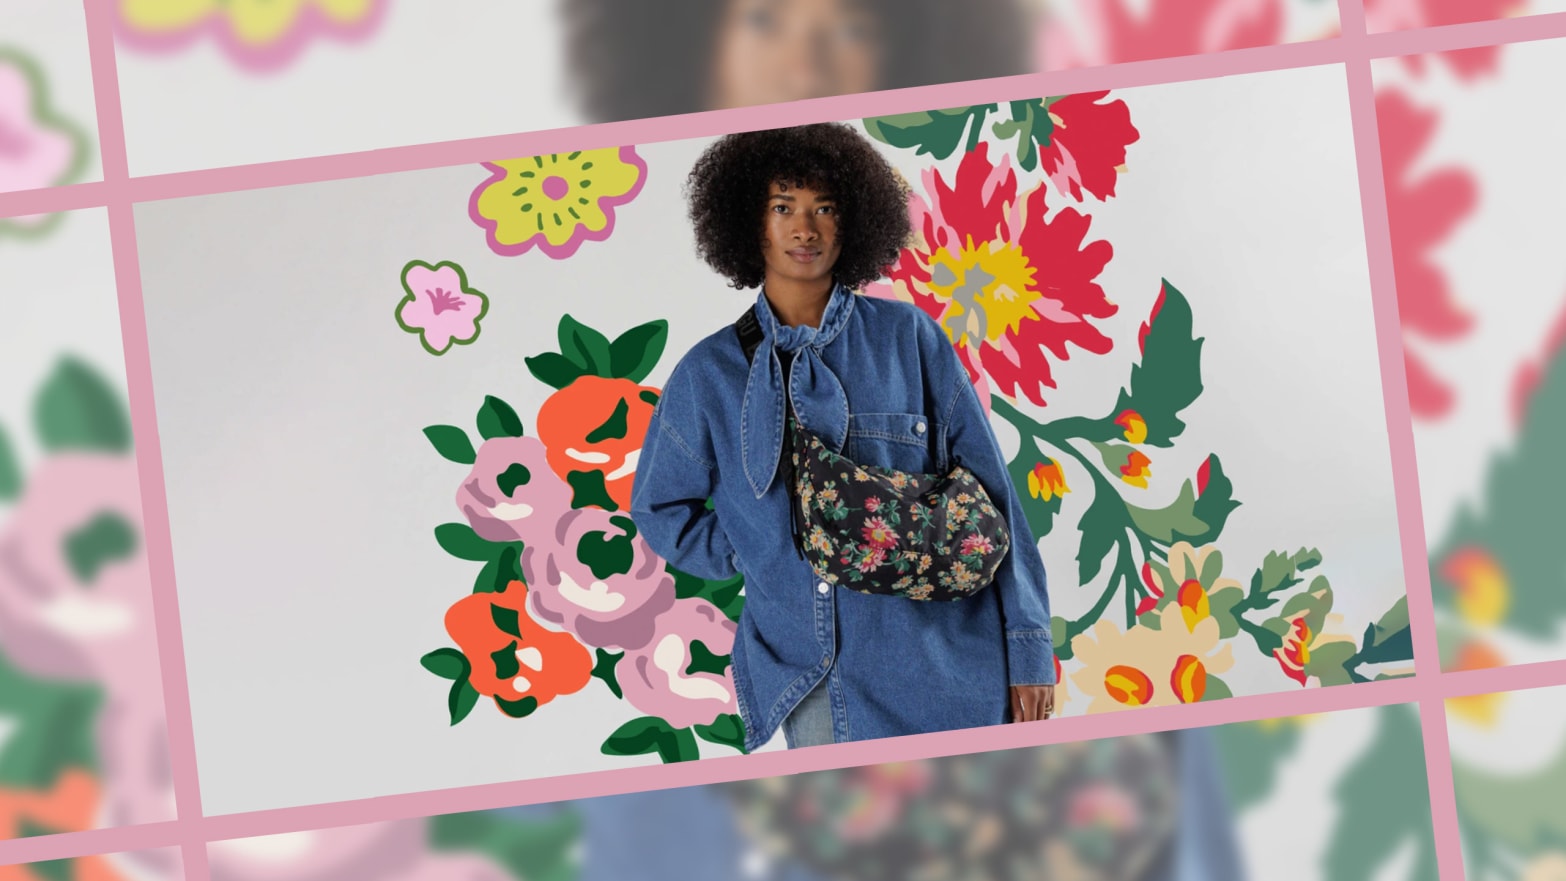 Perry Floral Laptop Tote